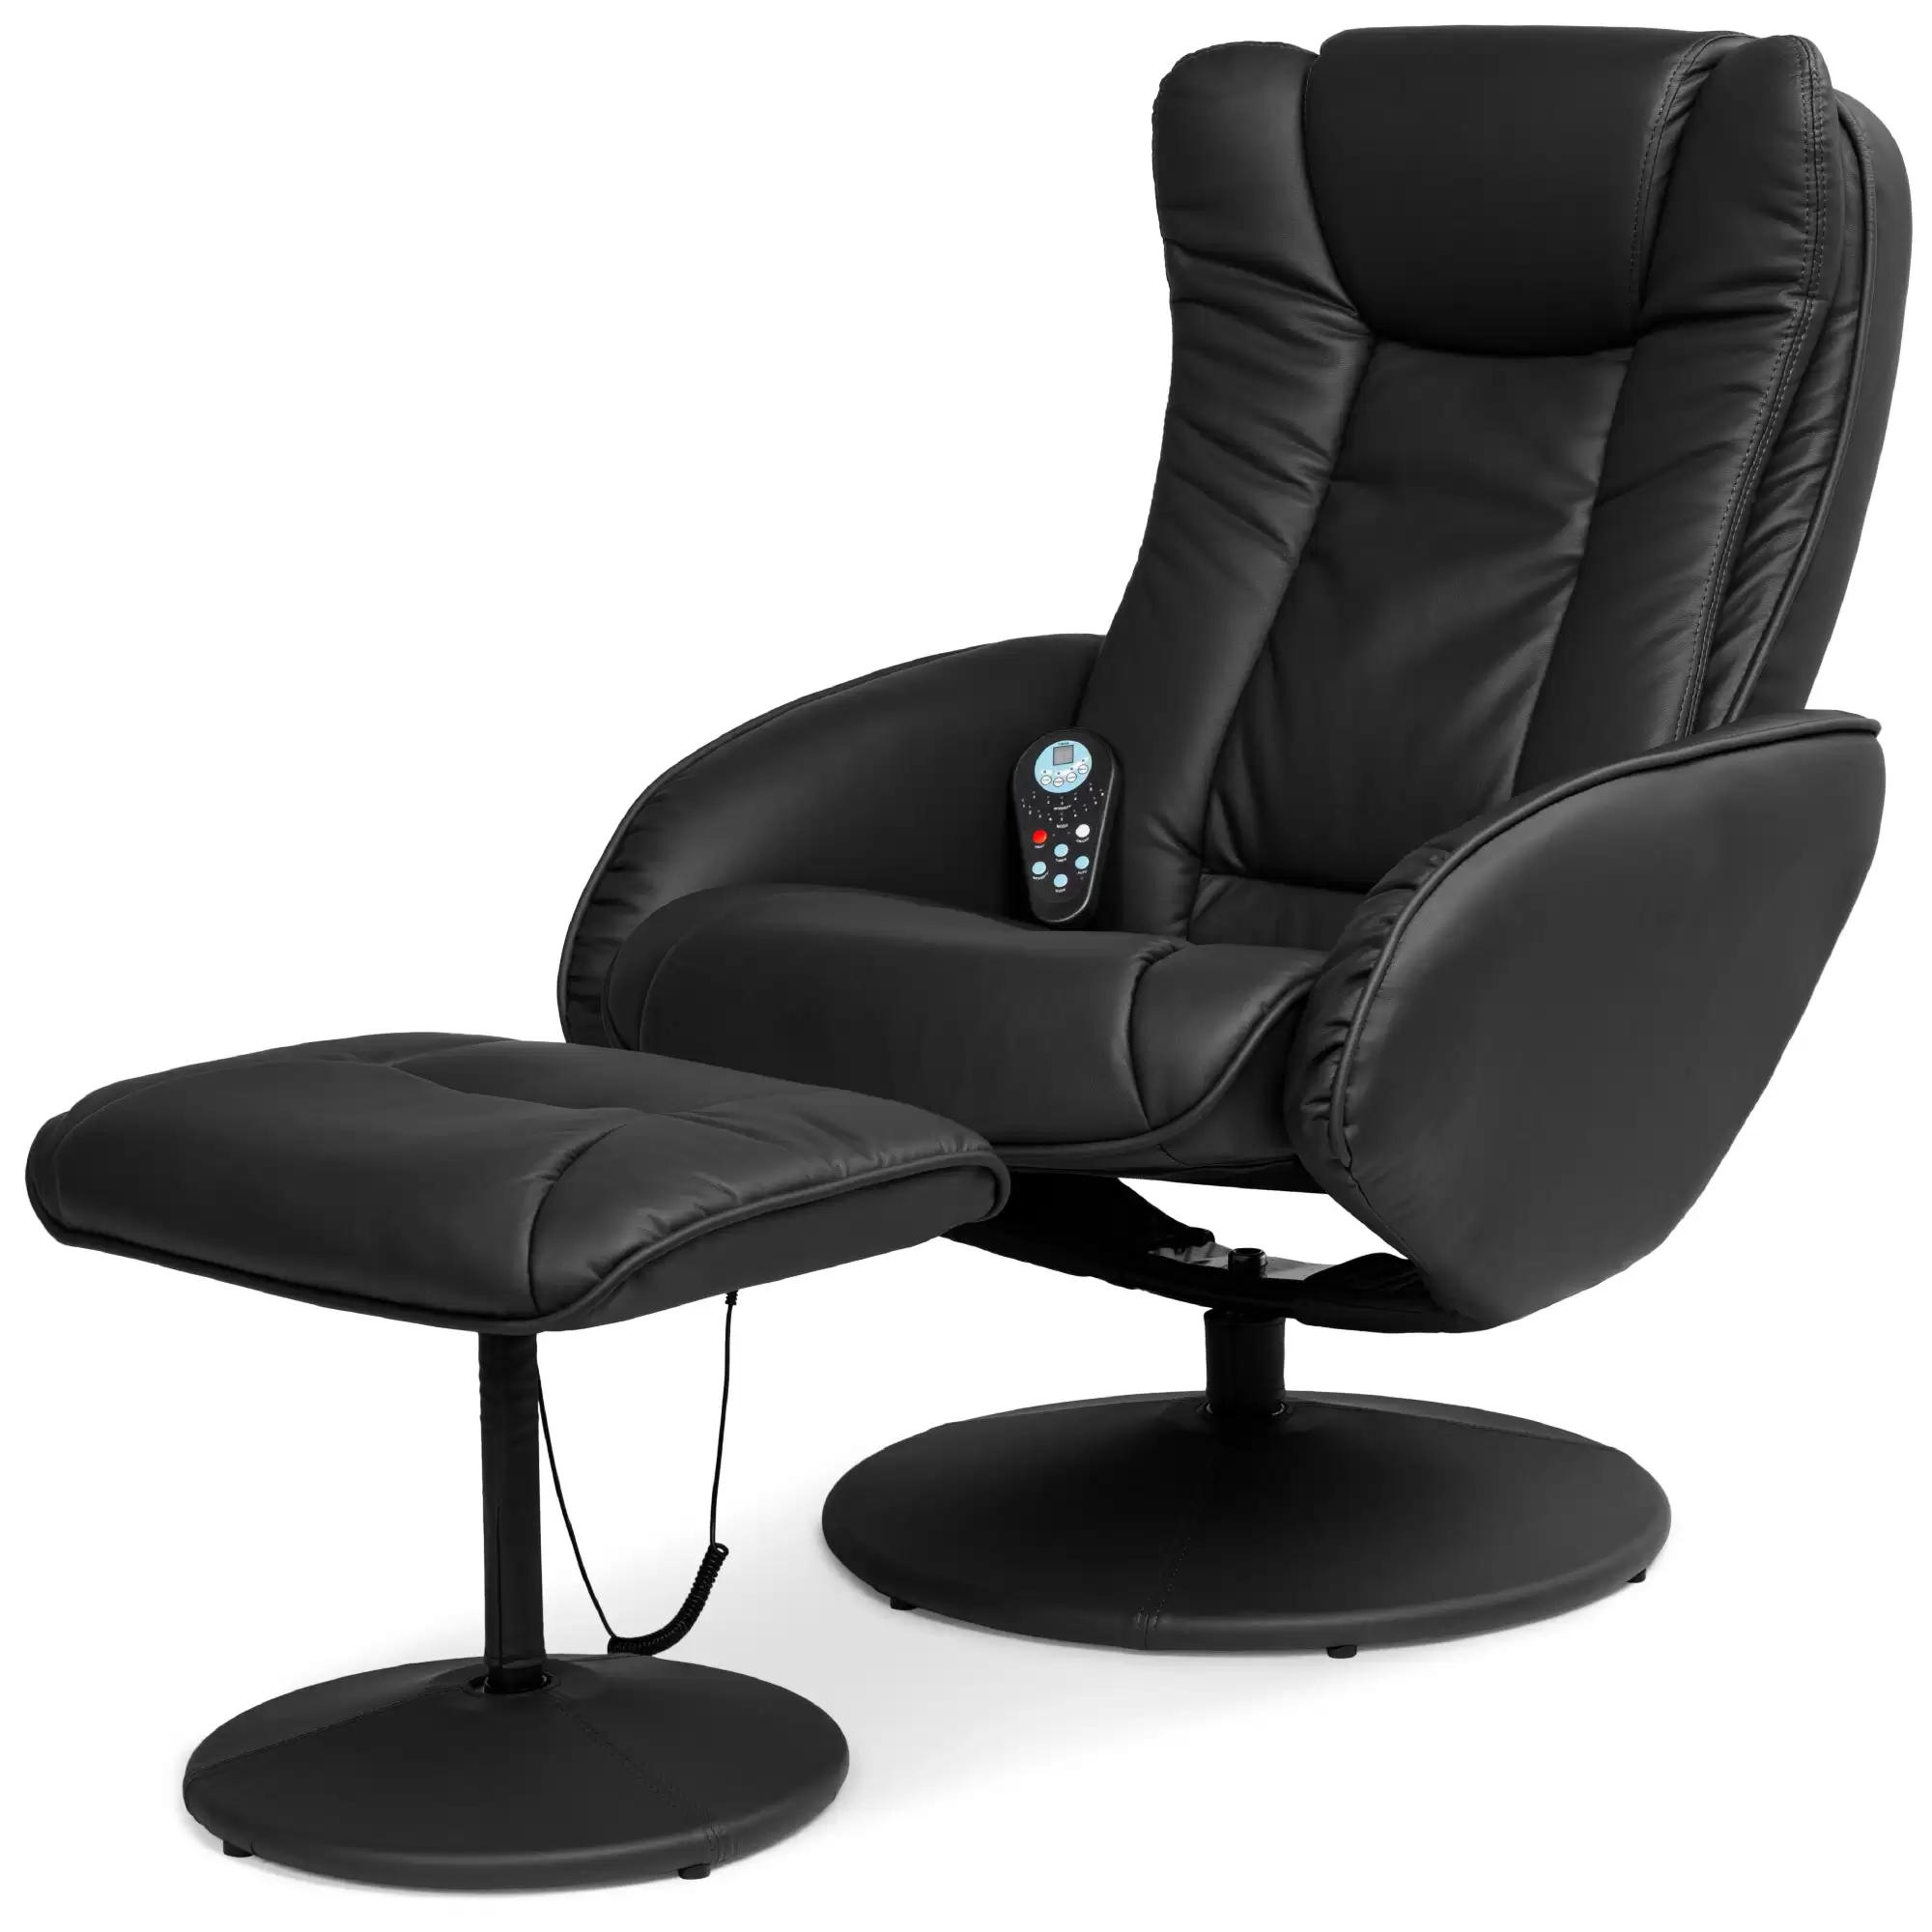 Order In Just $199.99 Faux Leather Electric Massage Recliner Chair W/ Stool Ottoman, Remote- Bcpchair With This Discount Coupon At Bestchoiceproducts